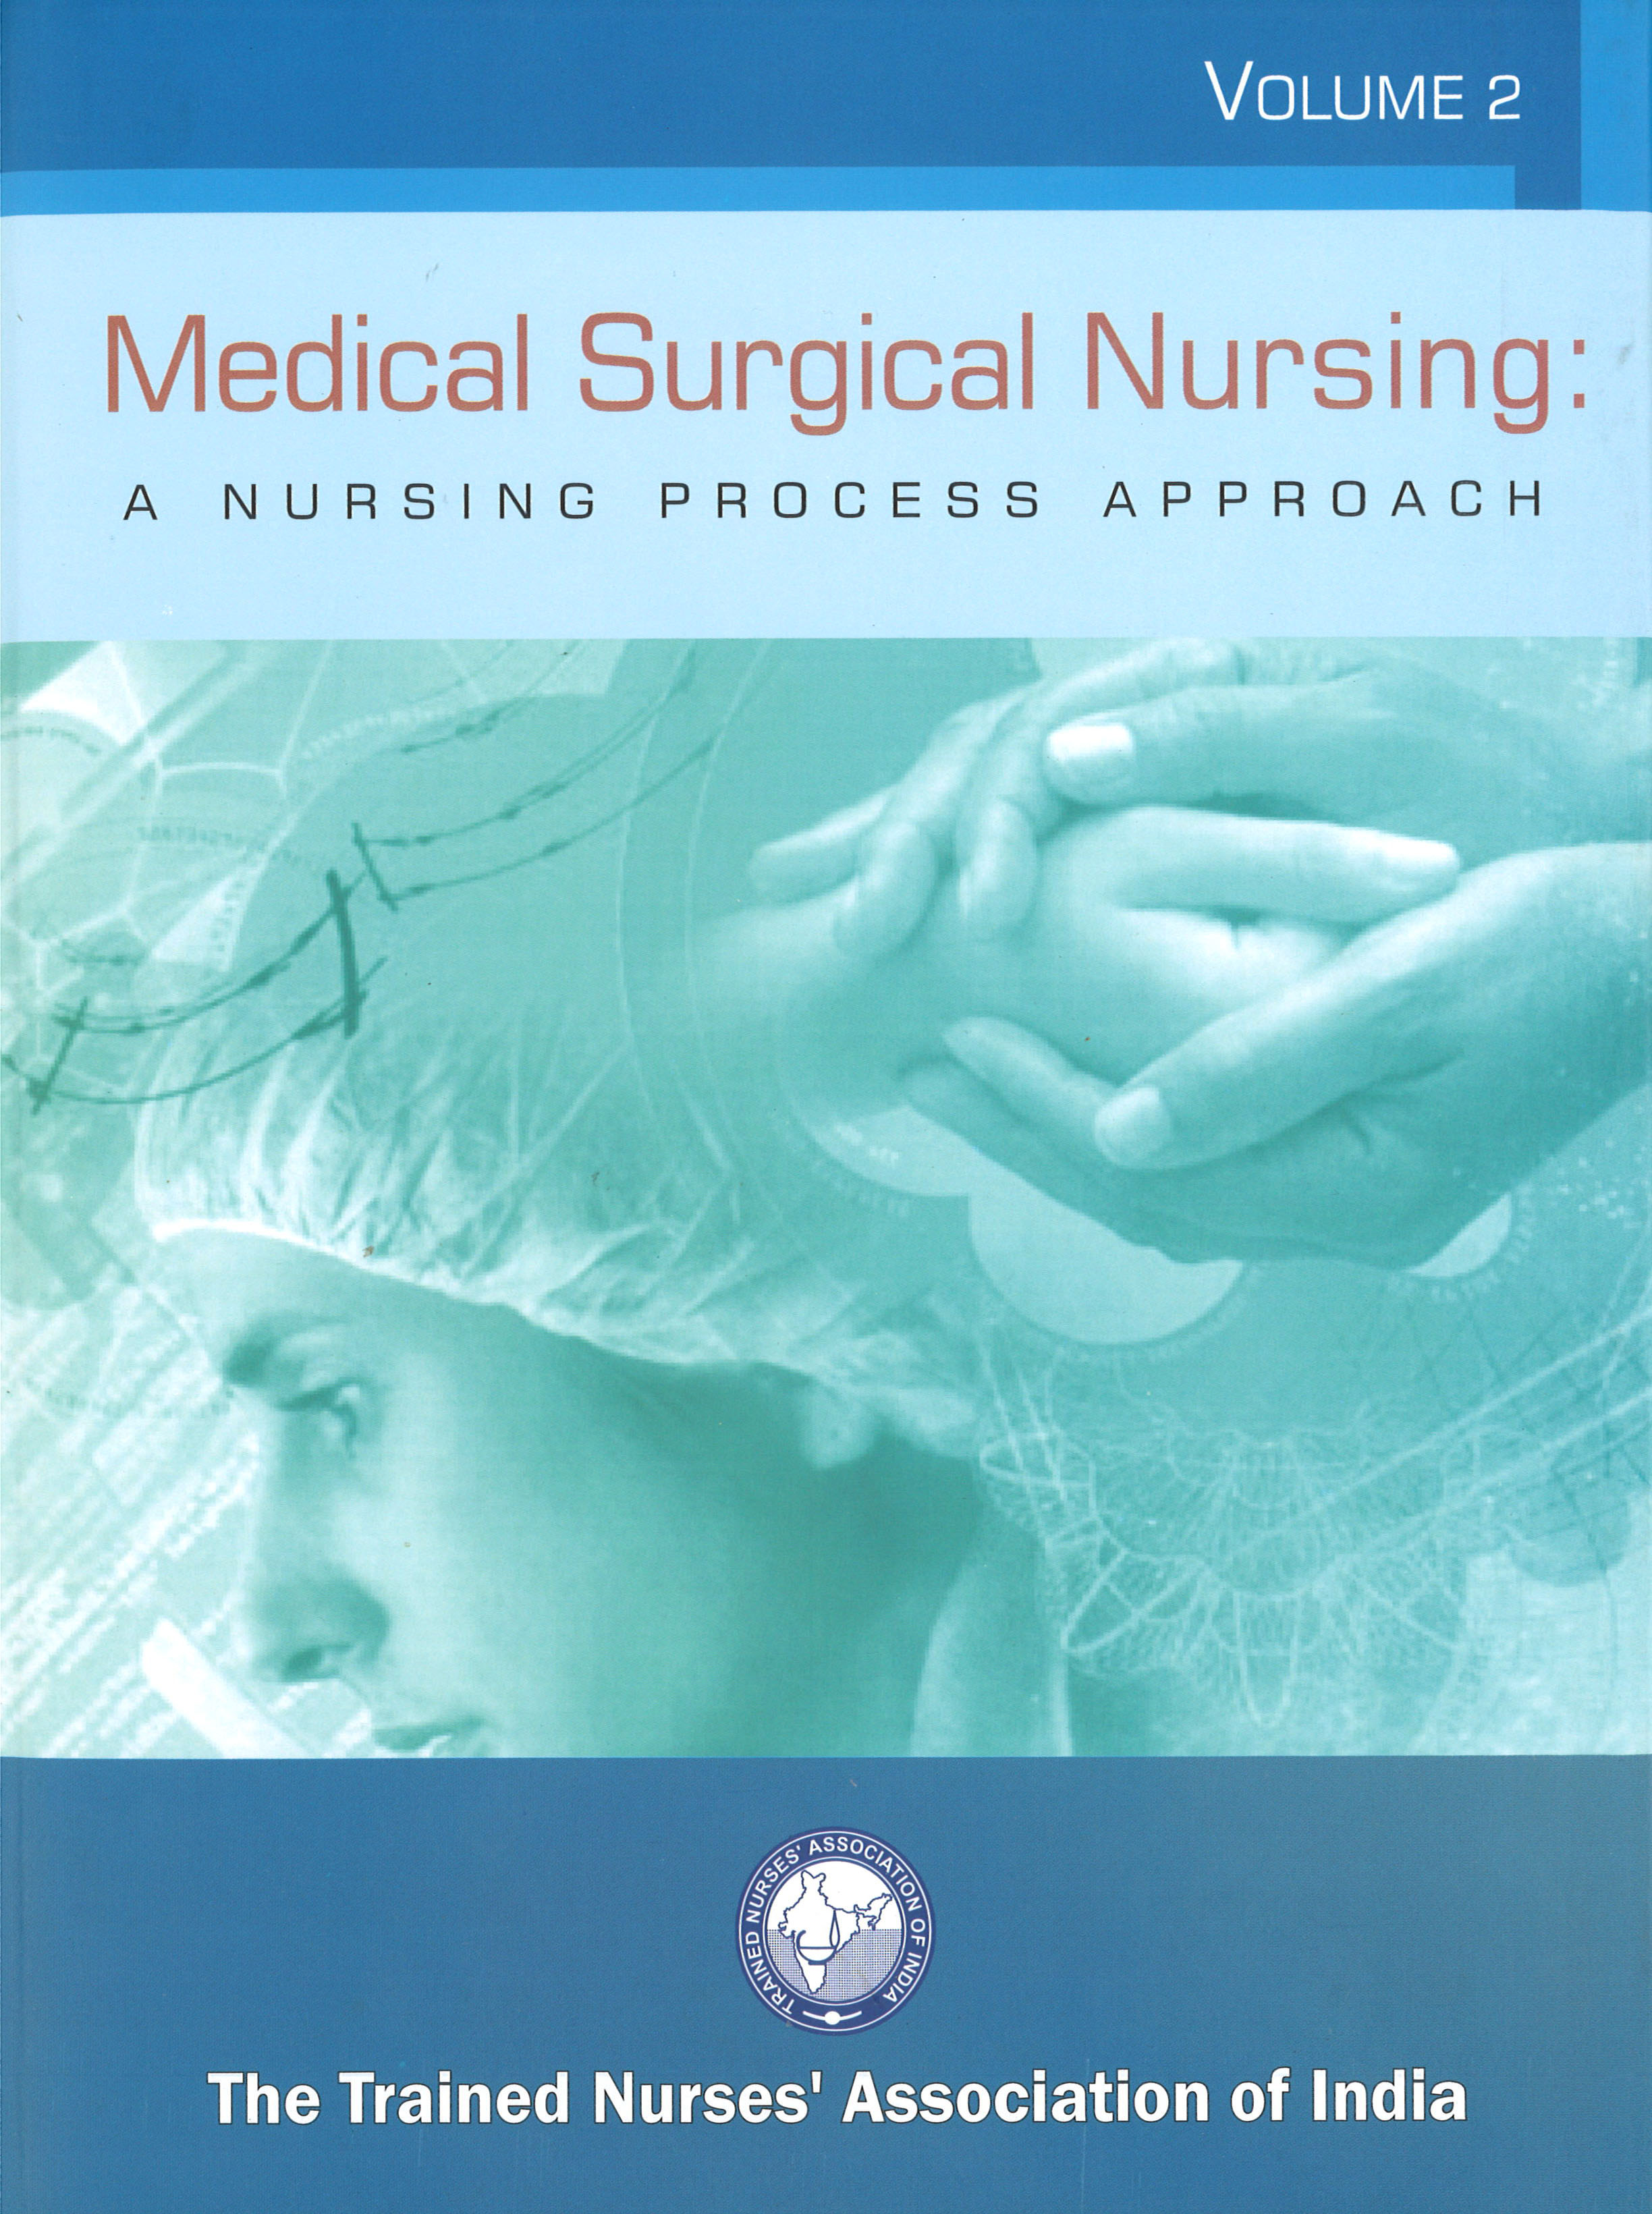 research study in medical surgical nursing